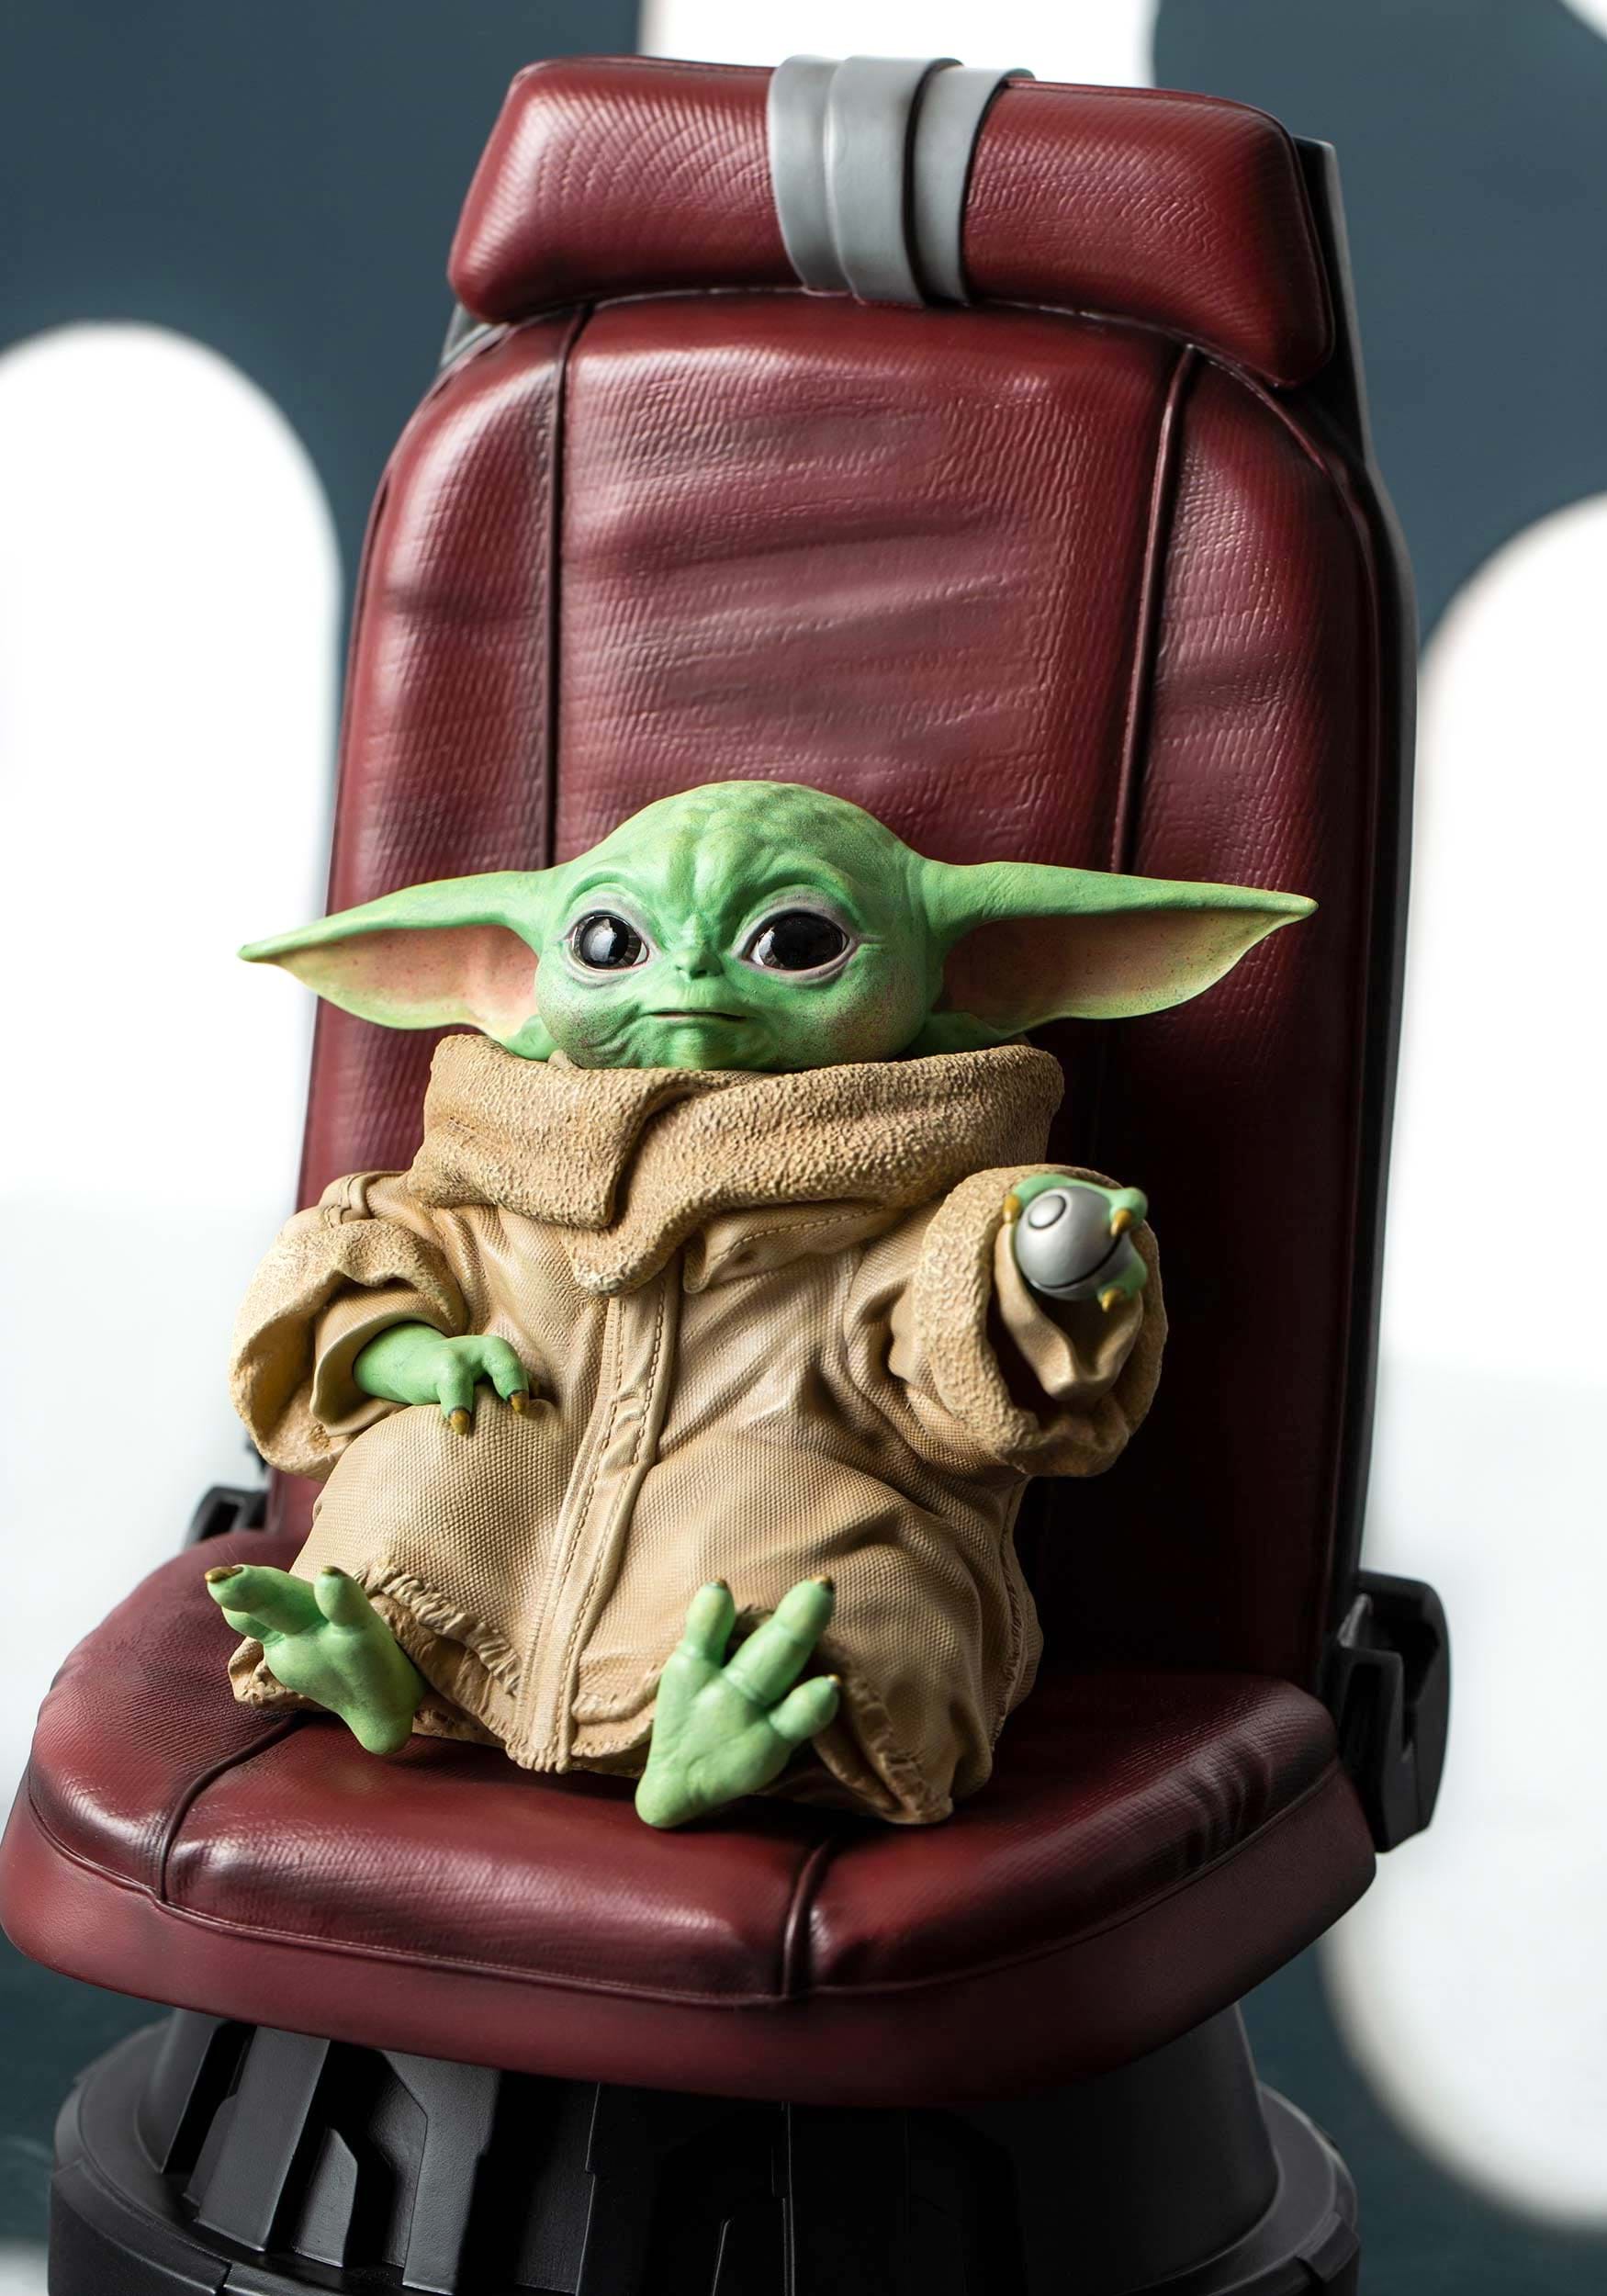 Gentle Giant Star Wars: The Mandalorian- Child In Chair Statue